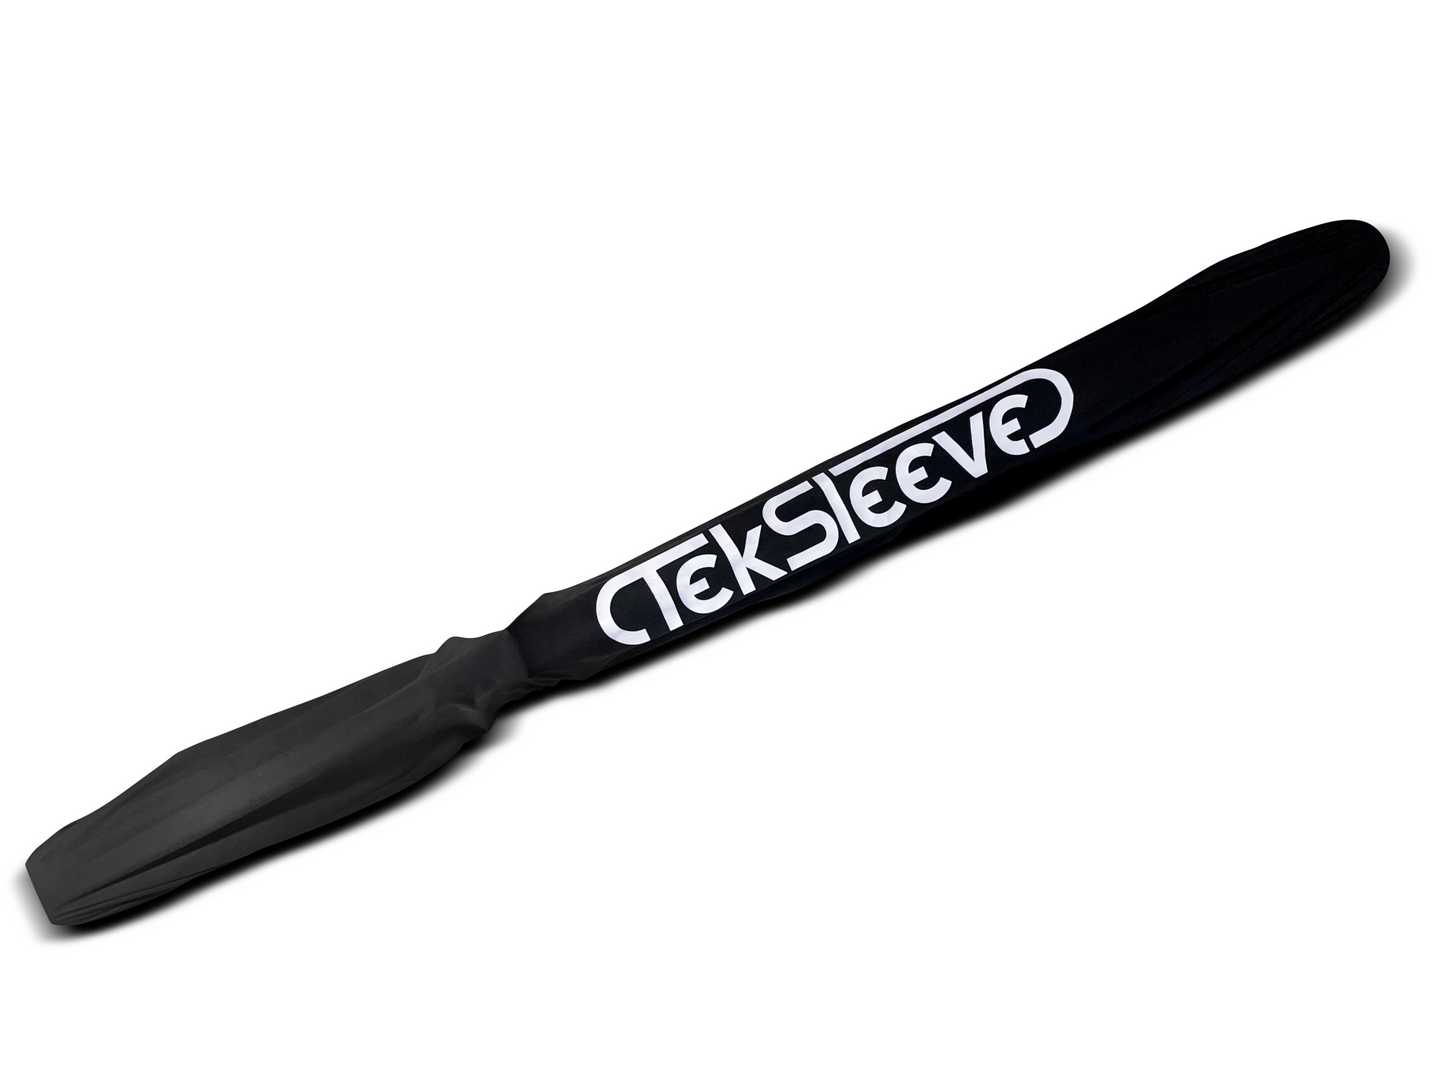 TekSleeve quick dry ski sleeve. The easiest ski cover for your equipment, guaranteed!